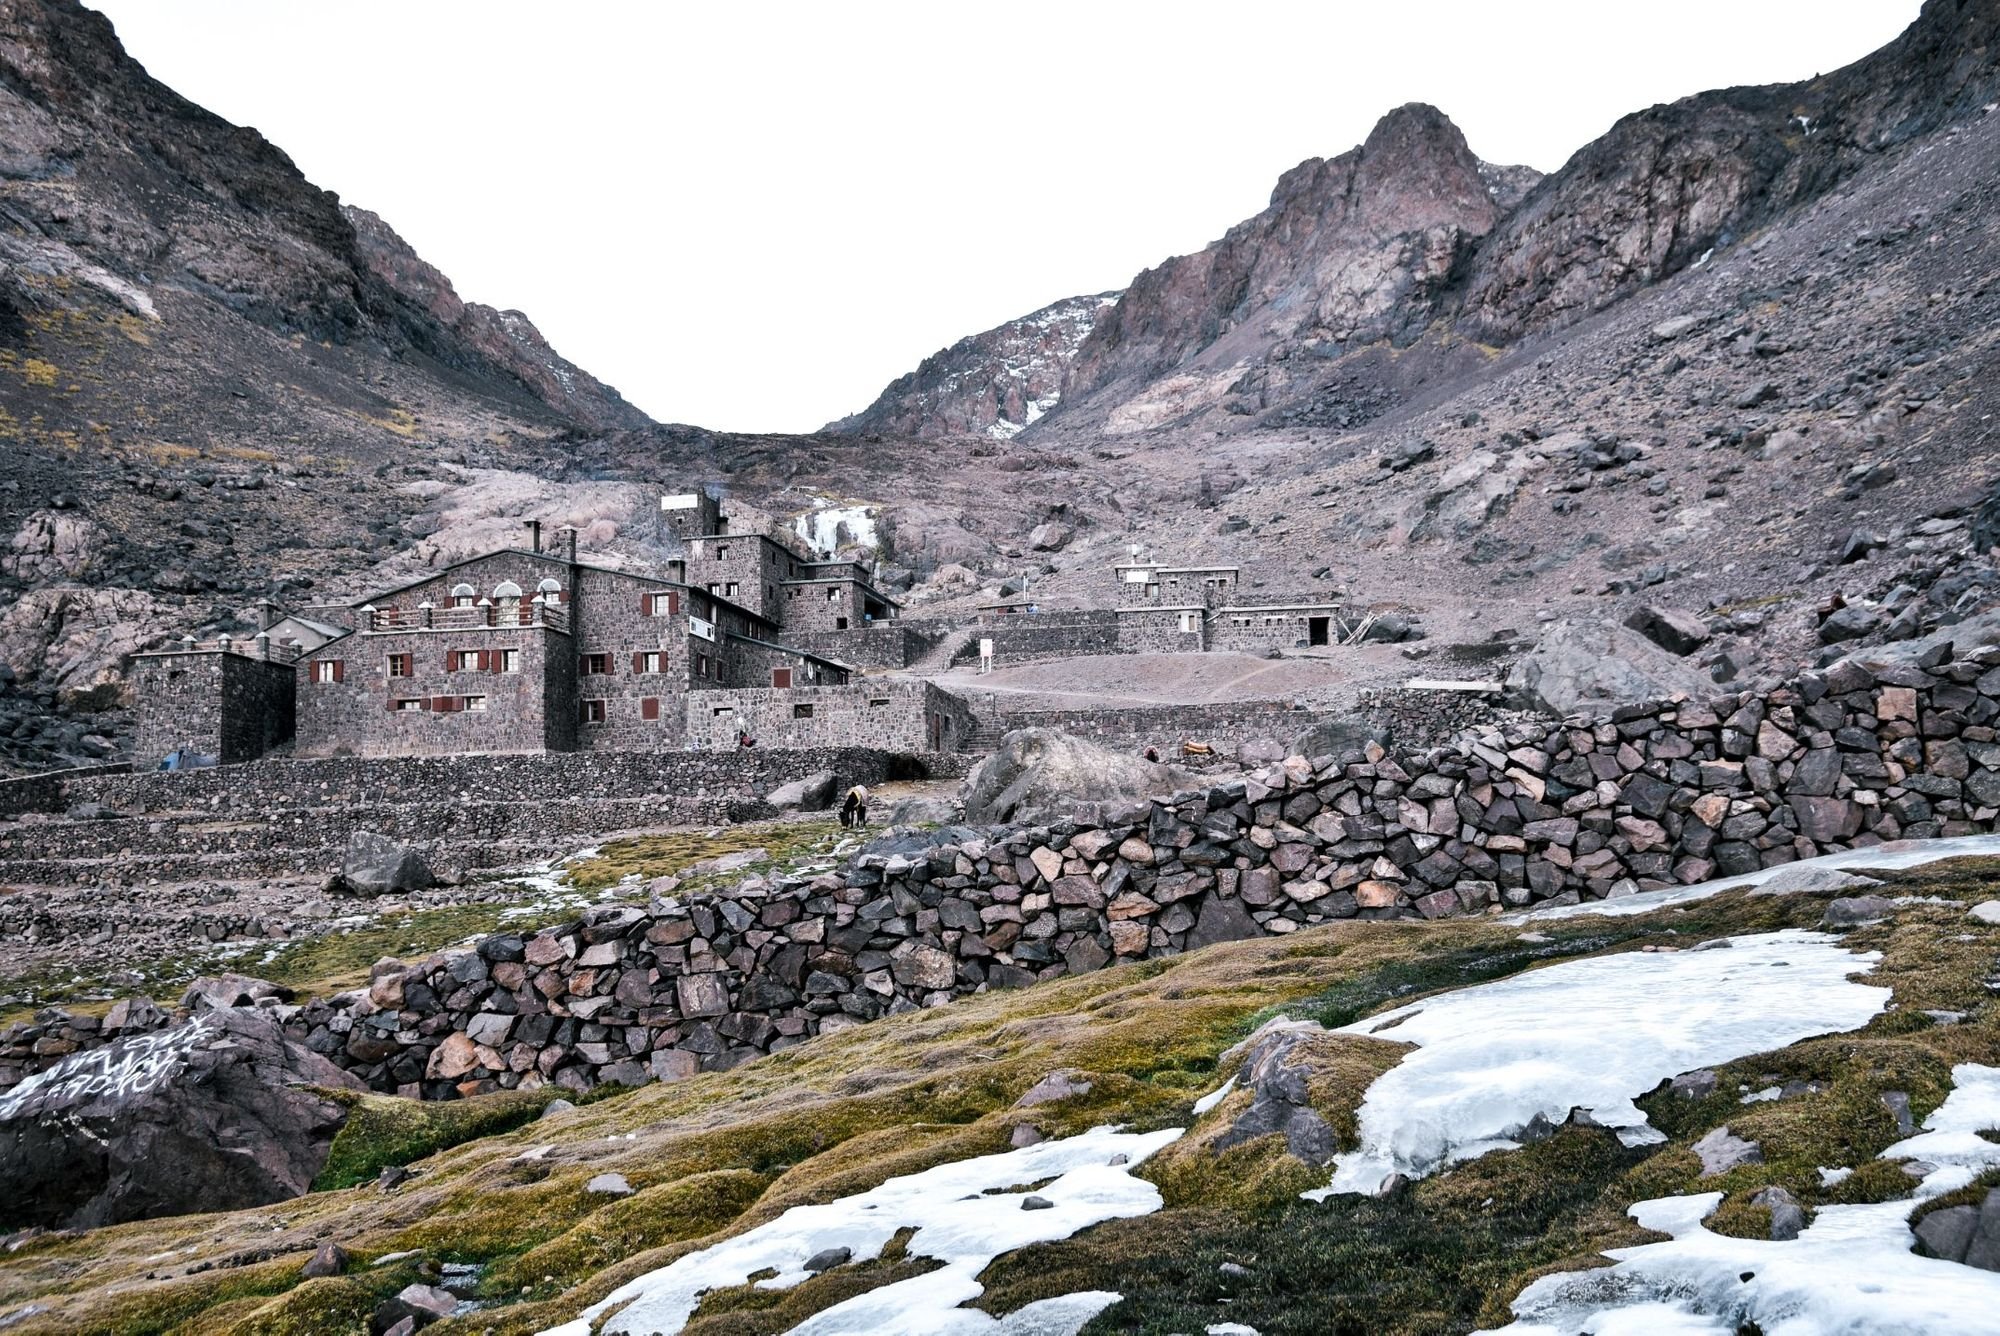 Neltner refuge, or the Toubkal refuge hut, which sits at 3207m on the mountain and was first built by the CAF in 1938. Photo: Getty